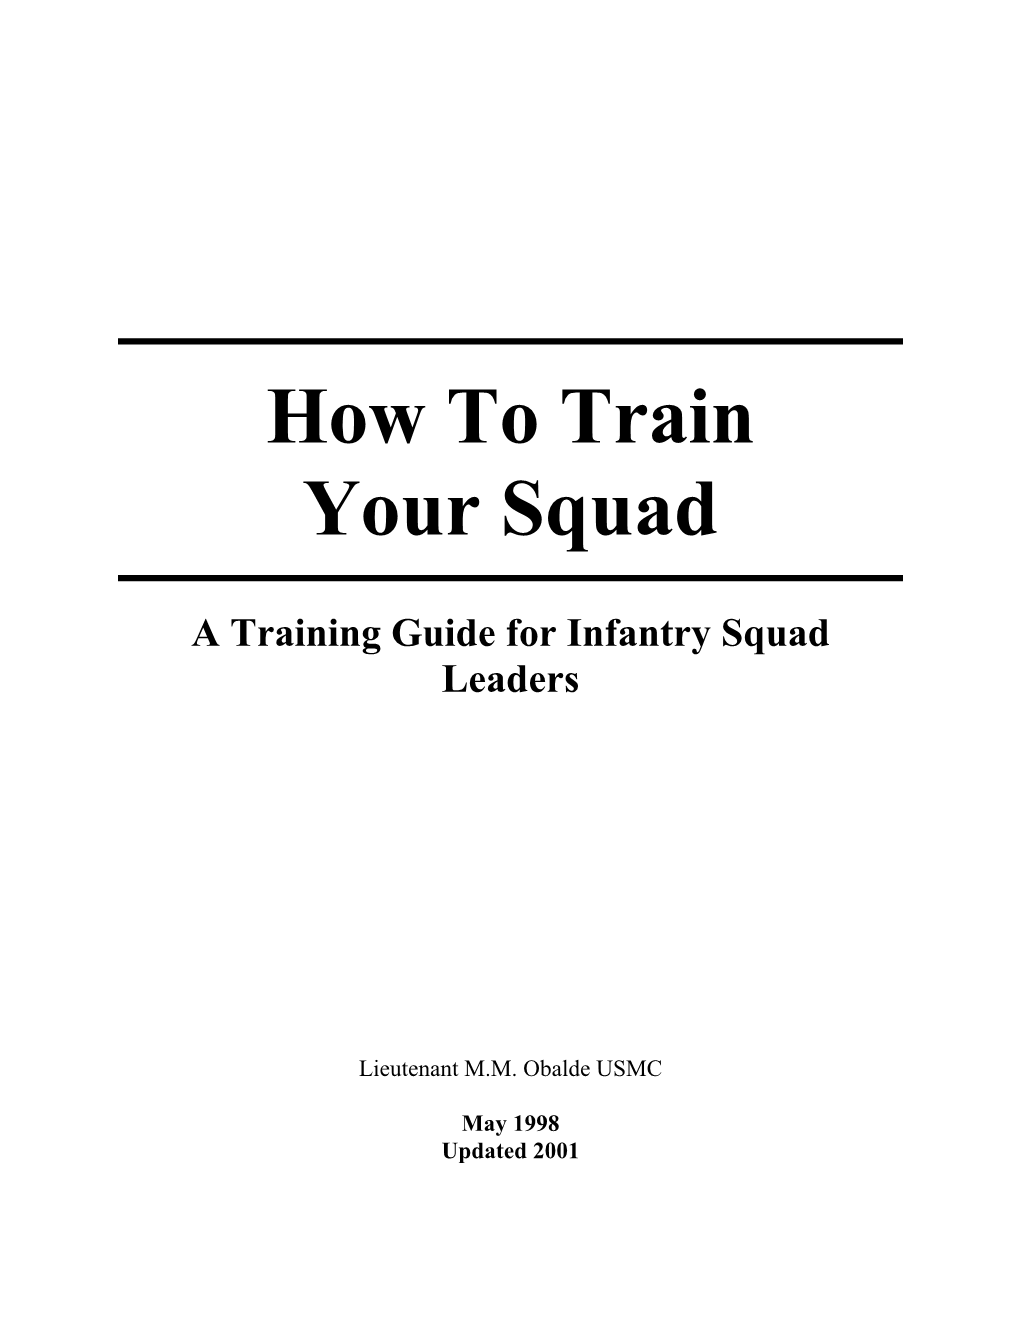 How to Train Your Squad